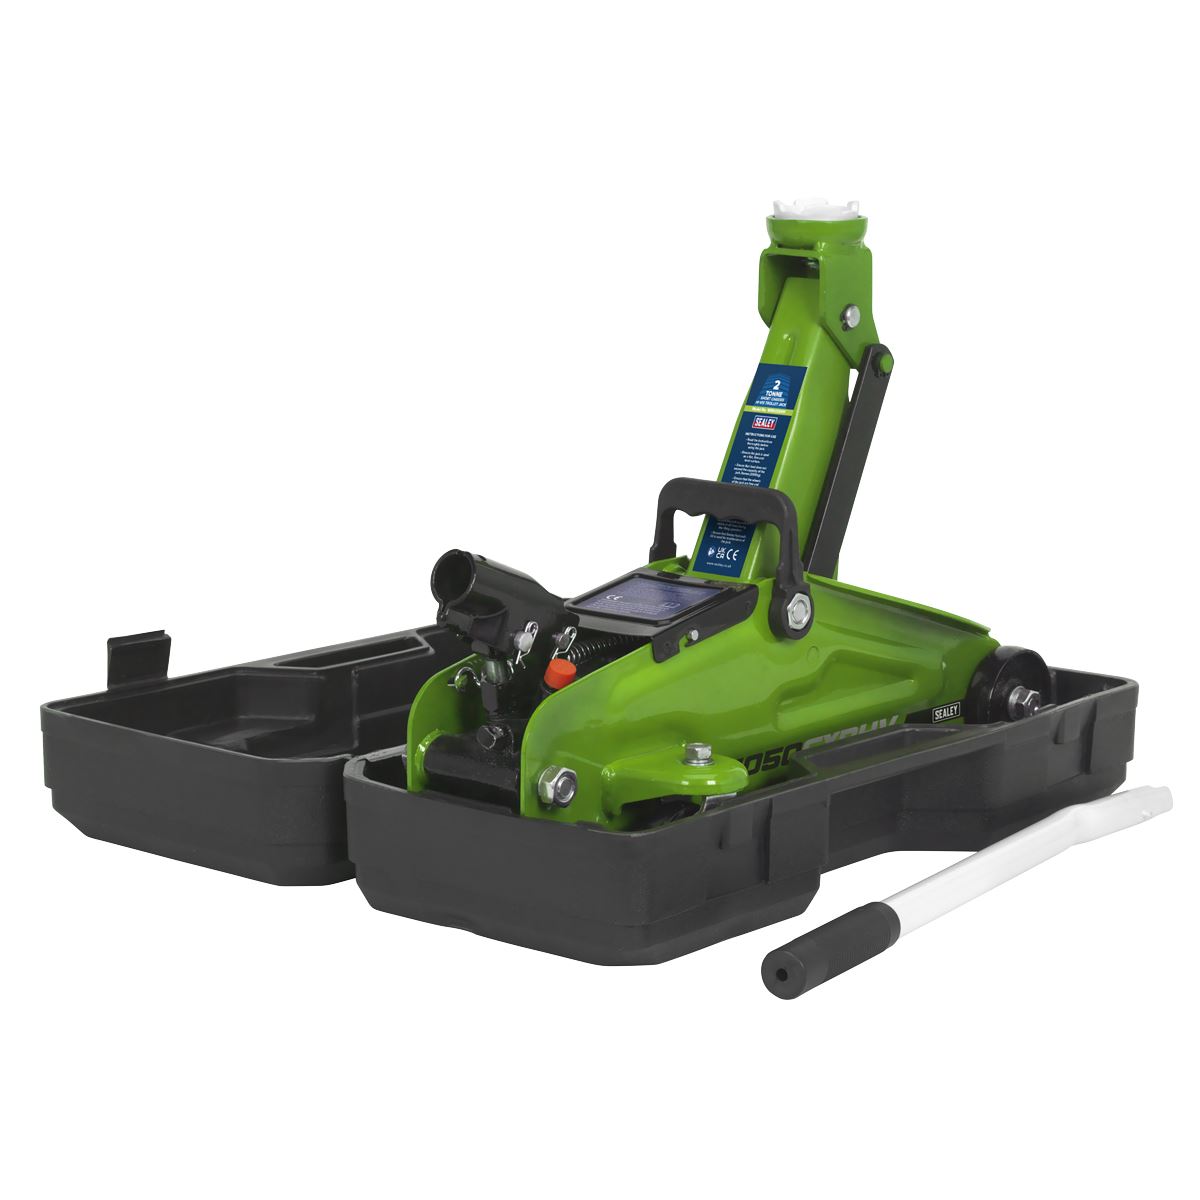 Sealey Short Chassis Trolley Jack with Storage Case 2 Tonne - Green